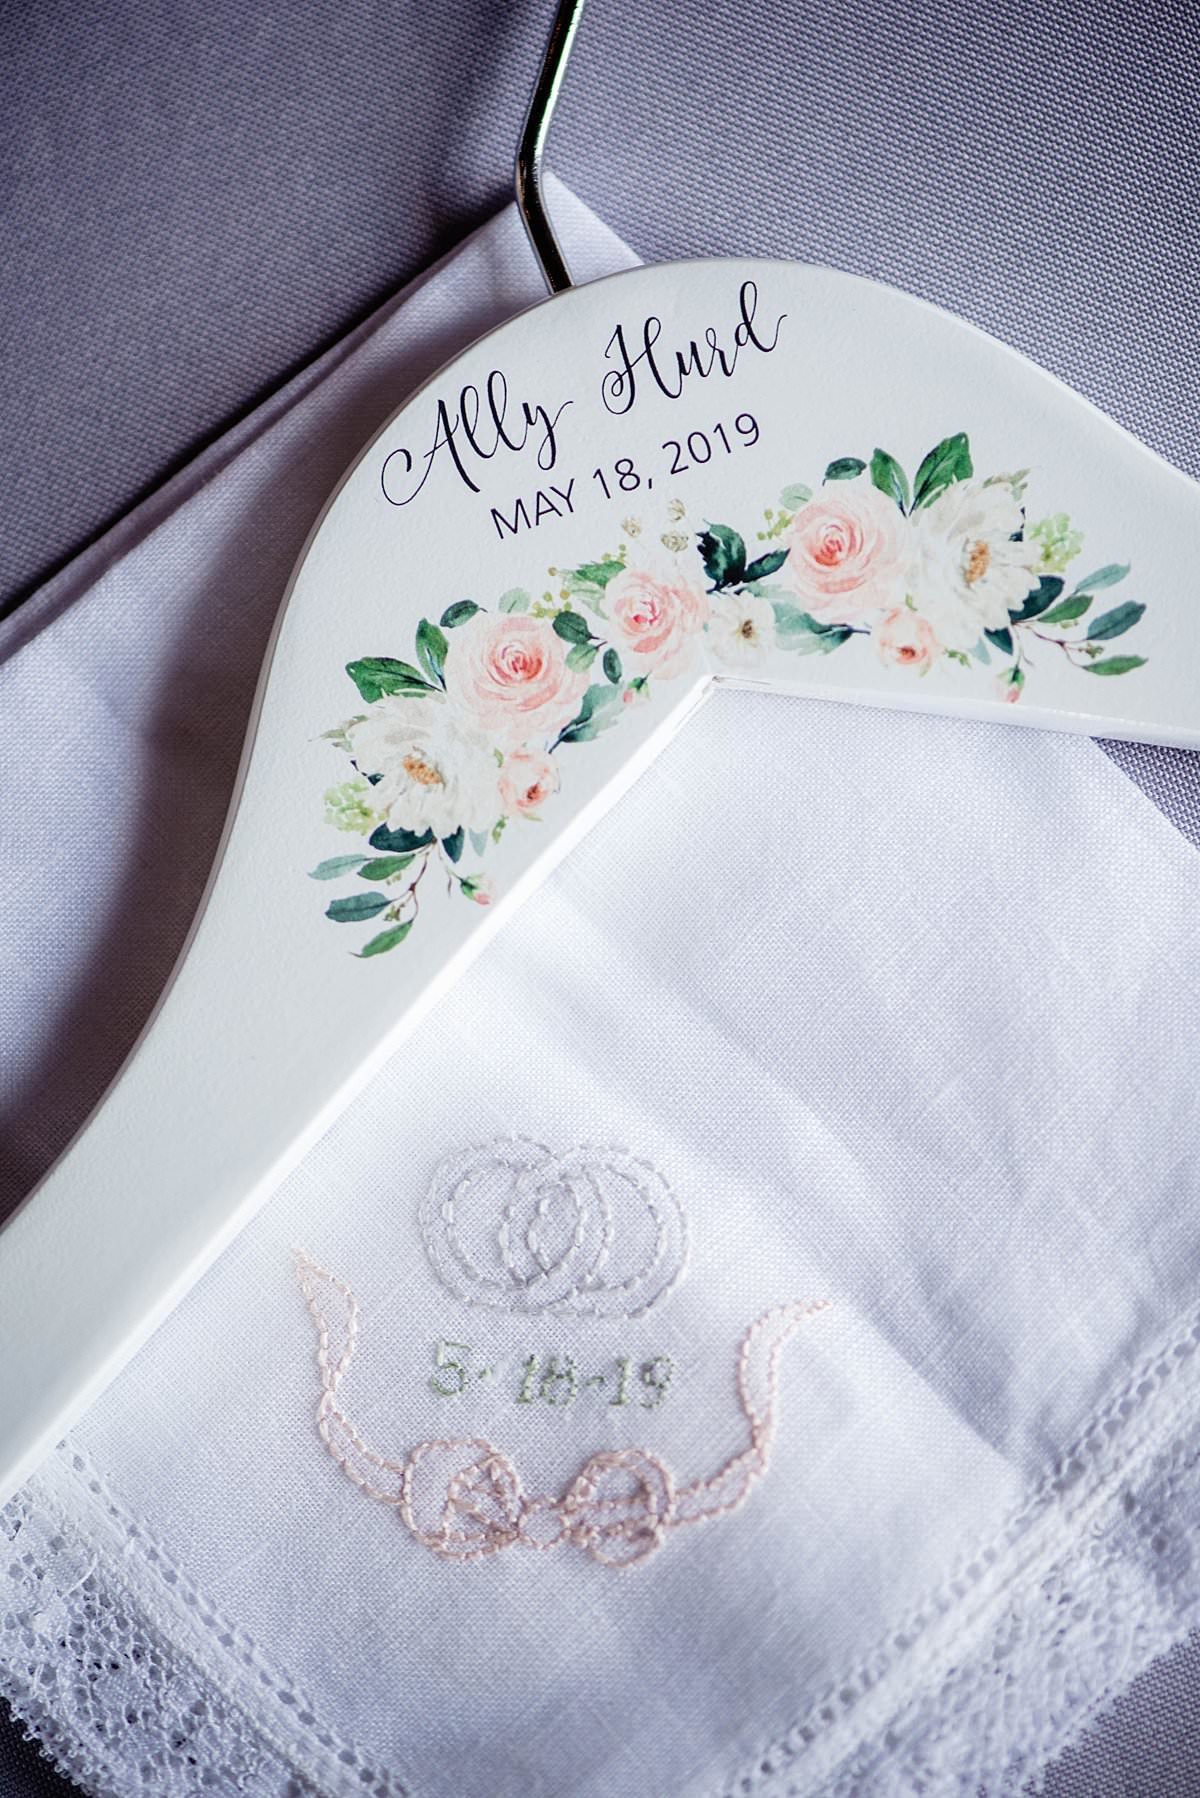 Custom white wedding hanger with flowers and calligraphy name sitting on top of a white embroidered handkerchief